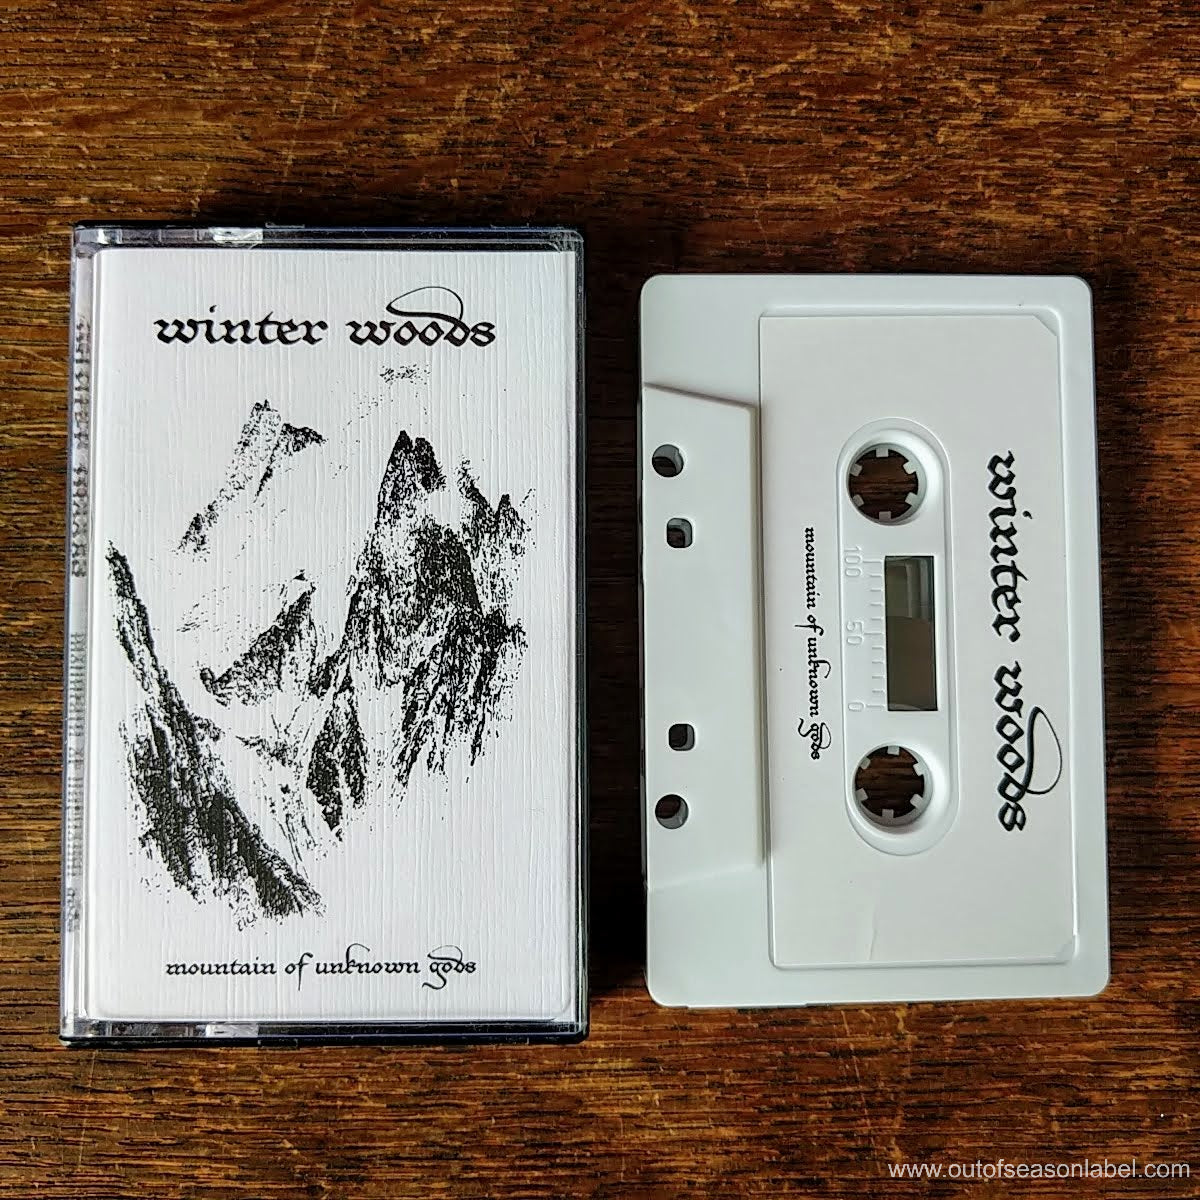 [SOLD OUT] WINTER WOODS "Mountain of Unknown Gods" Cassette Tape